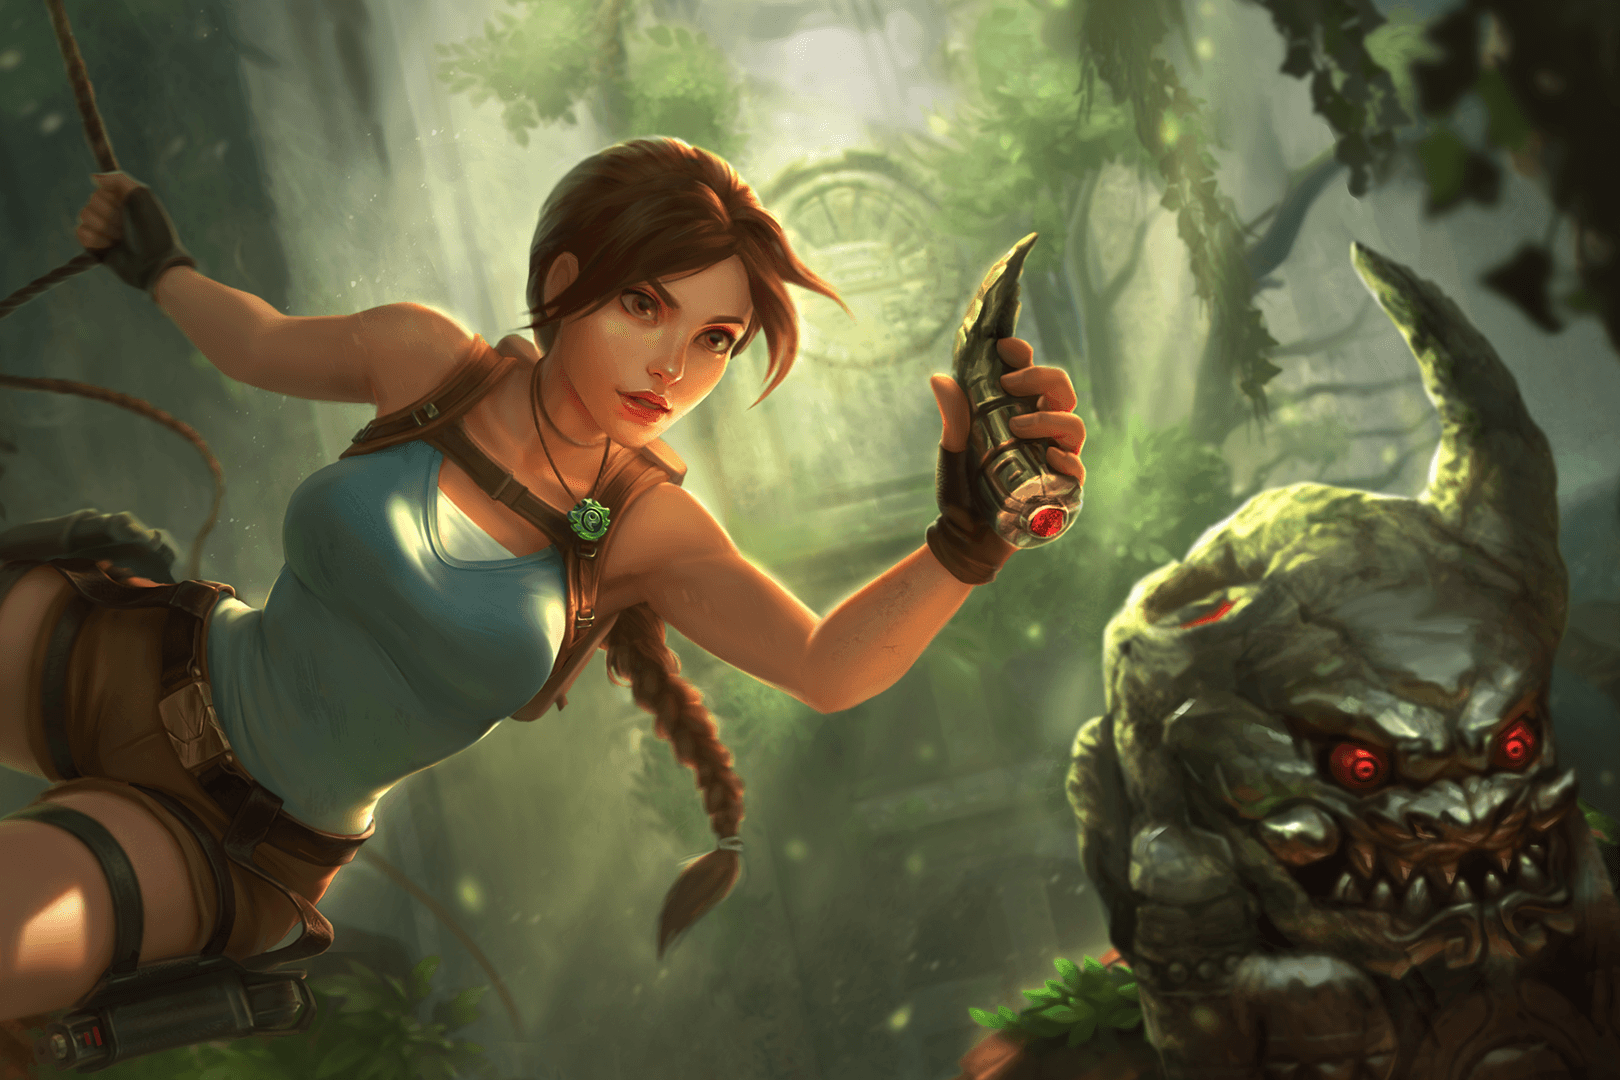 Lara Croft from Tomb Raider reaches for an artifact.